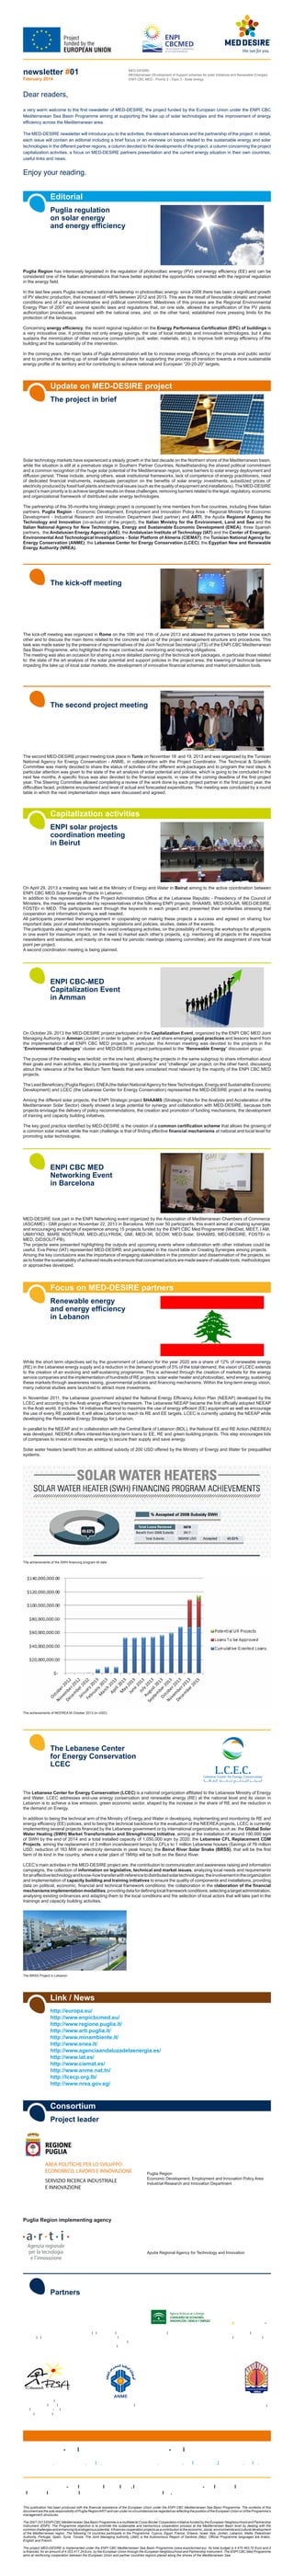 newsletter #01
February 2014
MED-DESIRE
MEDiterranean DEvelopment of Support schemes for solar Initiatives and Renewable Energies
ENPI CBC MED - Priority 2 - Topic 3 - Solar energy
a very warm welcome to the first newsletter of MED-DESIRE, the project funded by the European Union under the ENPI CBC
Mediterranean Sea Basin Programme aiming at supporting the take up of solar technologies and the improvement of energy
efficiency across the Mediterranean area.
The MED-DESIRE newsletter will introduce you to the activities, the relevant advances and the partnership of the project: in detail,
each issue will contain an editorial including a brief focus or an interview on topics related to the sustainable energy and solar
technologies in the different partner regions, a column devoted to the developments of the project, a column concerning the project
capitalization activities, a focus on MED-DESIRE partners presentation and the current energy situation in their own countries,
useful links and news.
This publication has been produced with the financial assistance of the European Union under the ENPI CBC Mediterranean Sea Basin Programme. The contents of this
document are the sole responsibility of Puglia Region/ARTI and can under no circumstances be regarded as reflecting the position of the European Union or of the Programme’s
management structures.
The 2007-2013 ENPI CBC Mediterranean Sea Basin Programme is a multilateral Cross-Border Cooperation initiative funded by the European Neighbourhood and Partnership
Instrument (ENPI). The Programme objective is to promote the sustainable and harmonious cooperation process at the Mediterranean Basin level by dealing with the
commonchallengesandenhancingitsendogenouspotential.Itfinancescooperationprojectsasacontributiontotheeconomic,social,environmentalandculturaldevelopment
of the Mediterranean region. The following 14 countries participate in the Programme: Cyprus, Egypt, France, Greece, Israel, Italy, Jordan, Lebanon, Malta, Palestinian
Authority, Portugal, Spain, Syria, Tunisia. The Joint Managing Authority (JMA) is the Autonomous Region of Sardinia (Italy). Official Programme languages are Arabic,
English and French.
The project MED-DESIRE is implemented under the ENPI CBC Mediterranean Sea Basin Programme (www.enpicbcmed.eu). Its total budget is 4.470.463,70 Euro and it
is financed, for an amount of 4.023.417,24 Euro, by the European Union through the European Neighbourhood and Partnership Instrument. The ENPI CBC Med Programme
aims at reinforcing cooperation between the European Union and partner countries regions placed along the shores of the Mediterranean Sea.
ThisisthefirstMED-DESIREquarterlynewsletter.Ifyoudon'twanttoreceiveMED-DESIREnewslettersanymore,
please reply to this email writing 'unsubscribe' in the subject line.
Puglia regulation
on solar energy
and energy efficiency
Puglia Region has intensively legislated in the regulation of photovoltaic energy (PV) and energy efficiency (EE) and can be
considered one of the Italian administrations that have better exploited the opportunities connected with the regional regulation
in the energy field.
In the last few years Puglia reached a national leadership in photovoltaic energy: since 2006 there has been a significant growth
of PV electric production, that increased of +66% between 2012 and 2013. This was the result of favourable climatic and market
conditions and of a long administrative and political commitment. Milestones of this process are the Regional Environmental
Energy Plan of 2007 and several specific laws and regulations that, on one side, allowed the simplification of the PV plants
authorization procedures, compared with the national ones, and, on the other hand, established more pressing limits for the
protection of the landscape.
Concerning energy efficiency, the recent regional regulation on the Energy Performance Certification (EPC) of buildings is
a very innovative one. It promotes not only energy savings, the use of local materials and innovative technologies, but it also
sustains the minimization of other resource consumption (soil, water, materials, etc.), to improve both energy efficiency of the
building and the sustainability of the intervention.
In the coming years, the main tasks of Puglia administration will be to increase energy efficiency in the private and public sector
and to promote the setting up of small solar thermal plants for supporting the process of transition towards a more sustainable
energy profile of its territory and for contributing to achieve national and European “20-20-20” targets.
Editorial
The project in brief
Solar technology markets have experienced a steady growth in the last decade on the Northern shore of the Mediterranean basin,
while the situation is still at a premature stage in Southern Partner Countries. Notwithstanding the shared political commitment
and a common recognition of the huge solar potential of the Mediterranean region, some barriers to solar energy deployment and
diffusion persist. These include, among others, weak institutional frameworks, lack of competence of energy practitioners, need
of dedicated financial instruments, inadequate perception on the benefits of solar energy investments, subsidized prices of
electricity produced by fossil fuel plants and technical issues (such as the quality of equipment and installations). The MED-DESIRE
project’s main priority is to achieve tangible results on these challenges, removing barriers related to the legal, regulatory, economic
and organizational framework of distributed solar energy technologies.
The partnership of this 35-months long strategic project is composed by nine members from five countries, including three Italian
partners, Puglia Region - Economic Development, Employment and Innovation Policy Area - Regional Ministry for Economic
Development - Industrial Research and Innovation Department (lead partner) and ARTI, the Apulia Regional Agency for
Technology and Innovation (co-actuator of the project), the Italian Ministry for the Environment, Land and Sea and the
Italian National Agency for New Technologies, Energy and Sustainable Economic Development (ENEA); three Spanish
partners, the Andalusian Energy Agency (AAE), the Andalusian Institute of Technology (IAT) and the Center of Energetic,
Environmental And Technological Investigations - Solar Platform of Almeria (CIEMAT); the Tunisian National Agency for
Energy Conservation (ANME); the Lebanese Center for Energy Conservation (LCEC); the Egyptian New and Renewable
Energy Authority (NREA).
Update on MED-DESIRE project
The second project meeting
The second MED-DESIRE project meeting took place in Tunis on November 18 and 19, 2013 and was organized by the Tunisian
National Agency for Energy Conservation - ANME, in collaboration with the Project Coordinator. The Technical & Scientific
Committee was mainly devoted to share the status of activities of the different work packages and to program the next steps. A
particular attention was given to the state of the art analysis of solar potential and policies, which is going to be concluded in the
next few months. A specific focus was also devoted to the financial aspects, in view of the coming deadline of the first project
year. The Steering Committee allowed completing a review of the work done by each project partner in the first project year, the
difficulties faced, problems encountered and level of actual and forecasted expenditures. The meeting was concluded by a round
table in which the next implementation steps were discussed and agreed.
ENPI solar projects
coordination meeting
in Beirut
On April 29, 2013 a meeting was held at the Ministry of Energy and Water in Beirut aiming to the active coordination between
ENPI CBC MED Solar Energy Projects in Lebanon.
In addition to the representative of the Project Administration Office at the Lebanese Republic - Presidency of the Council of
Ministers, the meeting was attended by representatives of the following ENPI projects: SHAAMS, MED-SOLAR, MED-DESIRE,
FOSTEr in MED. The participants went through the keywords in each project and presented their similarities stressing that
cooperation and information sharing is well needed.
All participants presented their engagement in cooperating on making these projects a success and agreed on sharing four
important data: pool of stakeholders/experts, legislations and policies, studies, dates of the events.
The participants also agreed on the need to avoid overlapping activities, on the possibility of having the workshops for all projects
in one event for maximum impact, on the need to market each other’s projects, e.g. mentioning all projects in the respective
newsletters and websites, and mainly on the need for periodic meetings (steering committee), and the assignment of one focal
point per project.
A second coordination meeting is being planned.
Capitalization activities
The kick-off meeting
The kick-off meeting was organized in Rome on the 10th and 11th of June 2013 and allowed the partners to better know each
other and to discuss the main items related to the concrete start up of the project management structure and procedures. This
task was made easier by the presence of representatives of the Joint Technical Secretariat (JTS) of the ENPI CBC Mediterranean
Sea Basin Programme, who highlighted the major contractual, monitoring and reporting obligations.
The meeting was also an occasion for sharing a more detailed planning of the technical work packages, in particular those related
to: the state of the art analysis of the solar potential and support policies in the project area; the lowering of technical barriers
impeding the take up of local solar markets; the development of innovative financial schemes and market stimulation tools.
ENPI CBC-MED
Capitalization Event
in Amman
On October 29, 2013 the MED-DESIRE project participated in the Capitalization Event, organized by the ENPI CBC MED Joint
Managing Authority in Amman (Jordan) in order to gather, analyse and share emerging good practices and lessons learnt from
the implementation of all ENPI CBC MED projects. In particular, the Amman meeting was devoted to the projects in the
“Environmental Challenges” cluster and MED-DESIRE project participated to the “Renewable Energy” discussion group.
The purpose of the meeting was twofold: on the one hand, allowing the projects in the same subgroup to share information about
their goals and main activities, also by presenting one “good practice” and “challenge” per project; on the other hand, discussing
about the relevance of the five Medium Term Needs that were considered most relevant by the majority of the ENPI CBC MED
projects.
The Lead Beneficiary (Puglia Region), ENEA(the Italian NationalAgency for New Technologies, Energy and Sustainable Economic
Development) and LCEC (the Lebanese Center for Energy Conservation) represented the MED-DESIRE project at the meeting.
Among the different solar projects, the ENPI Strategic project SHAAMS (Strategic Hubs for the Analysis and Acceleration of the
Mediterranean Solar Sector) clearly showed a large potential for synergy and collaboration with MED-DESIRE, because both
projects envisage the delivery of policy recommendations, the creation and promotion of funding mechanisms, the development
of training and capacity building initiatives.
The key good practice identified by MED-DESIRE is the creation of a common certification scheme that allows the growing of
a common solar market, while the main challenge is that of finding effective financial mechanisms at national and local level for
promoting solar technologies.
ENPI CBC MED
Networking Event
in Barcelona
MED-DESIRE took part in the ENPI Networking event organized by the Association of Mediterranean Chambers of Commerce
(ASCAME) - GMI project on November 22, 2013 in Barcelona. With over 50 participants, this event aimed at creating synergies
and encouraging exchange of experience among 15 projects funded by the ENPI CBC Med Programme (MedDiet, MEET, I AM,
UMAYYAD, MARE NOSTRUM, MED-JELLYRISK, GMI, MED-3R, SCOW, MED-Solar, SHAAMS, MED-DESIRE, FOSTEr in
MED, DIDSOLIT-PB).
The projects were presented highlighting the outputs and upcoming events where collaboration with other initiatives could be
useful. Eva Pérez (IAT) represented MED-DESIRE and participated in the round table on Creating Synergies among projects.
Among the key conclusions was the importance of engaging stakeholders in the promotion and dissemination of the projects, so
astofosterthesustainabilityofachievedresultsandensurethatconcernedactorsaremadeawareofvaluabletools,methodologies
or approaches developed.
Renewable energy
and energy efficiency
in Lebanon
While the short term objectives set by the government of Lebanon for the year 2020 are a share of 12% of renewable energy
(RE) in the Lebanese energy supply and a reduction in the demand growth of 5% of the total demand, the vision of LCEC extends
to the creation of an evolving and self-sustaining programme. This is achieved through the creation of markets for the energy
service companies and the implementation of hundreds of RE projects: solar water heater and photovoltaic, wind energy, sustaining
these markets through awareness raising, governmental policies and financing mechanisms. Within the long-term energy vision,
many national studies were launched to attract more investments.
In November 2011, the Lebanese government adopted the National Energy Efficiency Action Plan (NEEAP) developed by the
LCEC and according to the Arab energy efficiency framework. The Lebanese NEEAP became the first officially adopted NEEAP
in the Arab world. It includes 14 initiatives that tend to maximize the use of energy efficient (EE) equipment as well as encourage
the use of every RE potential. It will allow Lebanon to reach its RE and EE targets. LCEC is currently updating the NEEAP while
developing the Renewable Energy Strategy for Lebanon.
In parallel to the NEEAP and in collaboration with the Central Bank of Lebanon (BDL), the National EE and RE Action (NEEREA)
was developed. NEEREA offers interest-free-long-term loans to EE, RE and green building projects. This step encourages lots
of companies to invest in renewable energy to secure their supply and save energy.
Solar water heaters benefit from an additional subsidy of 200 USD offered by the Ministry of Energy and Water for prequalified
systems.
Focus on MED-DESIRE partners
The achievements of the SWH financing program till date
The achievements of NEEREA till October 2013 (in USD)
http://europa.eu/
http://www.enpicbcmed.eu/
http://www.regione.puglia.it/
http://www.arti.puglia.it/
http://www.minambiente.it/
http://www.enea.it/
http://www.agenciaandaluzadelaenergia.es/
http://www.iat.es/
http://www.ciemat.es/
http://www.anme.nat.tn/
http://lcecp.org.lb/
http://www.nrea.gov.eg/
Link / News
Enjoy your reading.
Dear readers,
AREA POLITICHE PER LO SVILUPPO
ECONOMICO, LAVORO E INNOVAZIONE
SERVIZIO RICERCA INDUSTRIALE
E INNOVAZIONE
Puglia Region
Economic Development, Employment and Innovation Policy Area
Industrial Research and Innovation Department
Apulia Regional Agency for Technology and Innovation
Puglia Region implementing agency
Project leader
Consortium
The Lebanese Center
for Energy Conservation
LCEC
The Lebanese Center for Energy Conservation (LCEC) is a national organization affiliated to the Lebanese Ministry of Energy
and Water. LCEC addresses end-use energy conservation and renewable energy (RE) at the national level and its vision in
Lebanon is to achieve a low emission, green economic sector, shaped by the increase in the share of RE and the reduction in
the demand on Energy.
In addition to being the technical arm of the Ministry of Energy and Water in developing, implementing and monitoring its RE and
energy efficiency (EE) policies, and to being the technical backbone for the evaluation of the NEEREA projects, LCEC is currently
implementing several projects financed by the Lebanese government or by international organizations, such as: the Global Solar
Water Heating (SWH) Market Transformation and Strengthening Initiative, aiming at the installation of around 190,000 sqm
of SWH by the end of 2014 and a total installed capacity of 1,050,000 sqm by 2020; the Lebanese CFL Replacement CDM
Projects, aiming the replacement of 3 million incandescent lamps by CFLs to 1 million Lebanese houses (Savings of 76 million
USD, reduction of 163 MW on electricity demands in peak hours); the Beirut River Solar Snake (BRSS), that will be the first
farm of its kind in the country, where a solar plant of 1MWp will be built on the Beirut River.
LCEC’s main activities in the MED-DESIRE project are: the contribution to communication and awareness raising and information
campaigns, the collection of information on legislative, technical and market issues, analyzing local needs and requirements
foraneffectivetechnologyandknow-howtransferwithreferencetodistributedsolartechnologies;theinvolvementintheorganization
and implementation of capacity building and training initiatives to ensure the quality of components and installations, providing
data on political, economic, financial and technical framework conditions; the collaboration in the elaboration of the financial
mechanismsimplementationmodalities,providingdatafordefininglocalframeworkconditions,selectingatargetadministration,
analysing existing ordinances and adapting them to the local conditions and the selection of local actors that will take part in the
trainings and capacity building activities.
The BRSS Project in Lebanon
Italian Ministry
for the Environment,
Land and Sea
Italian National Agency
for New technologies,
Energy and Sustainable
Economic Development
Center of Energetic,
Environmental And
Technological
Investigations - Solar
Platform of Almeria
Tunisian National
Agency for Energy
Conservation
Lebanese Center
for Energy
Conservation
Egyptian New
and Renewable
Energy Authority
Partners
Andalusian
Institute of Technology
MED-DESIRE Project Manager
Giuseppe Creanza
g.creanza@arti.puglia.it
Contacts
MED-DESIRE Communication Manager
Francesca Tondi Anna Liberti
f.tondi@arti.puglia.it a.liberti@arti.puglia.it
Andalusian Energy Agency
 